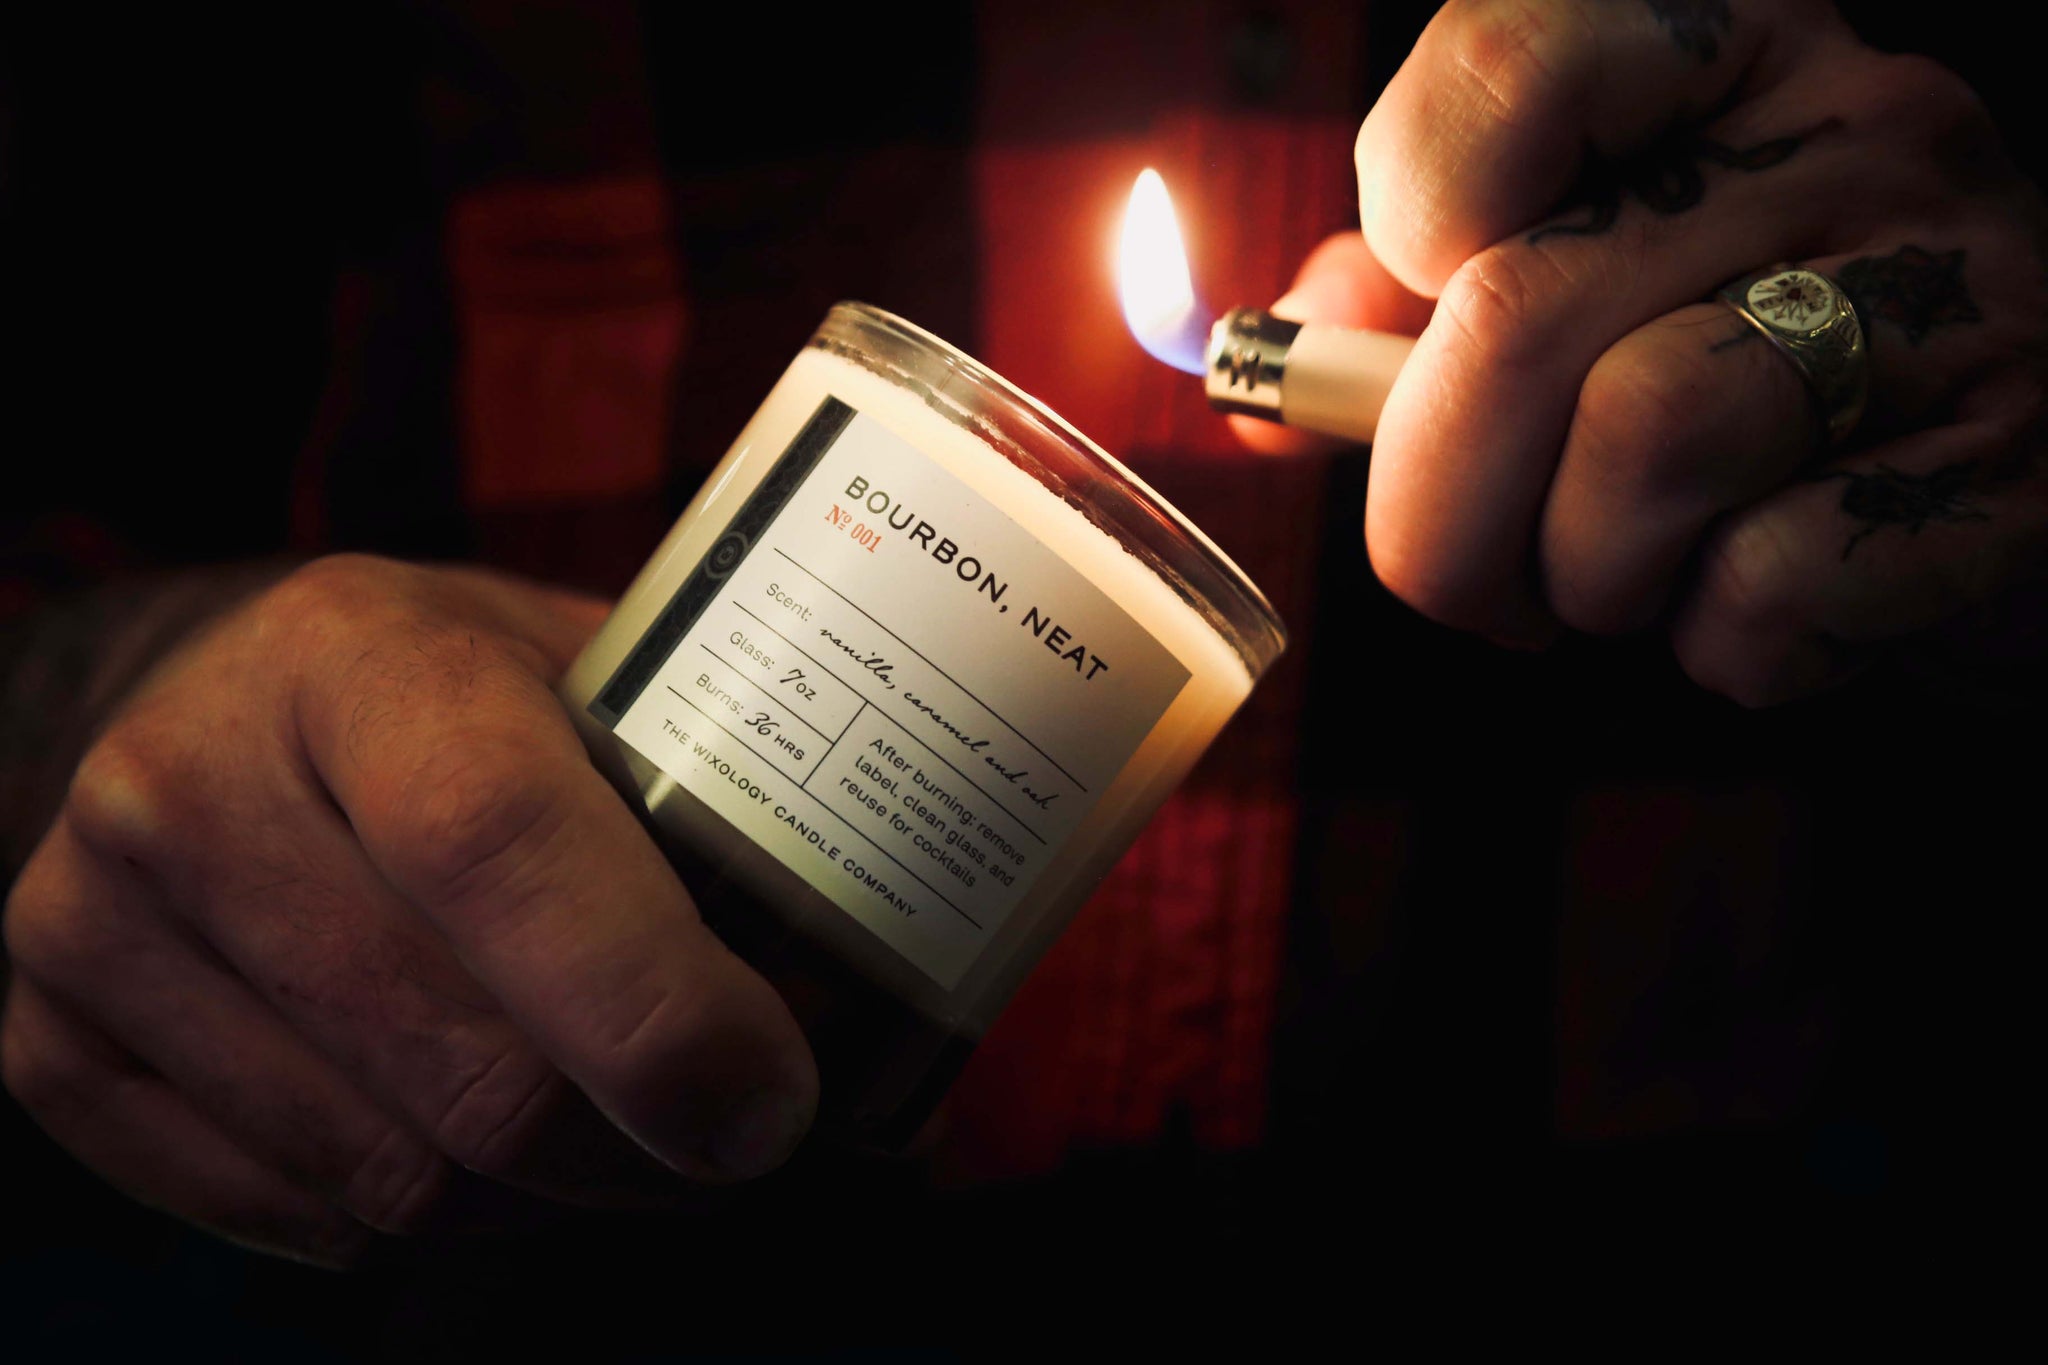 bourbon candle being lit by man in a flannel shirt